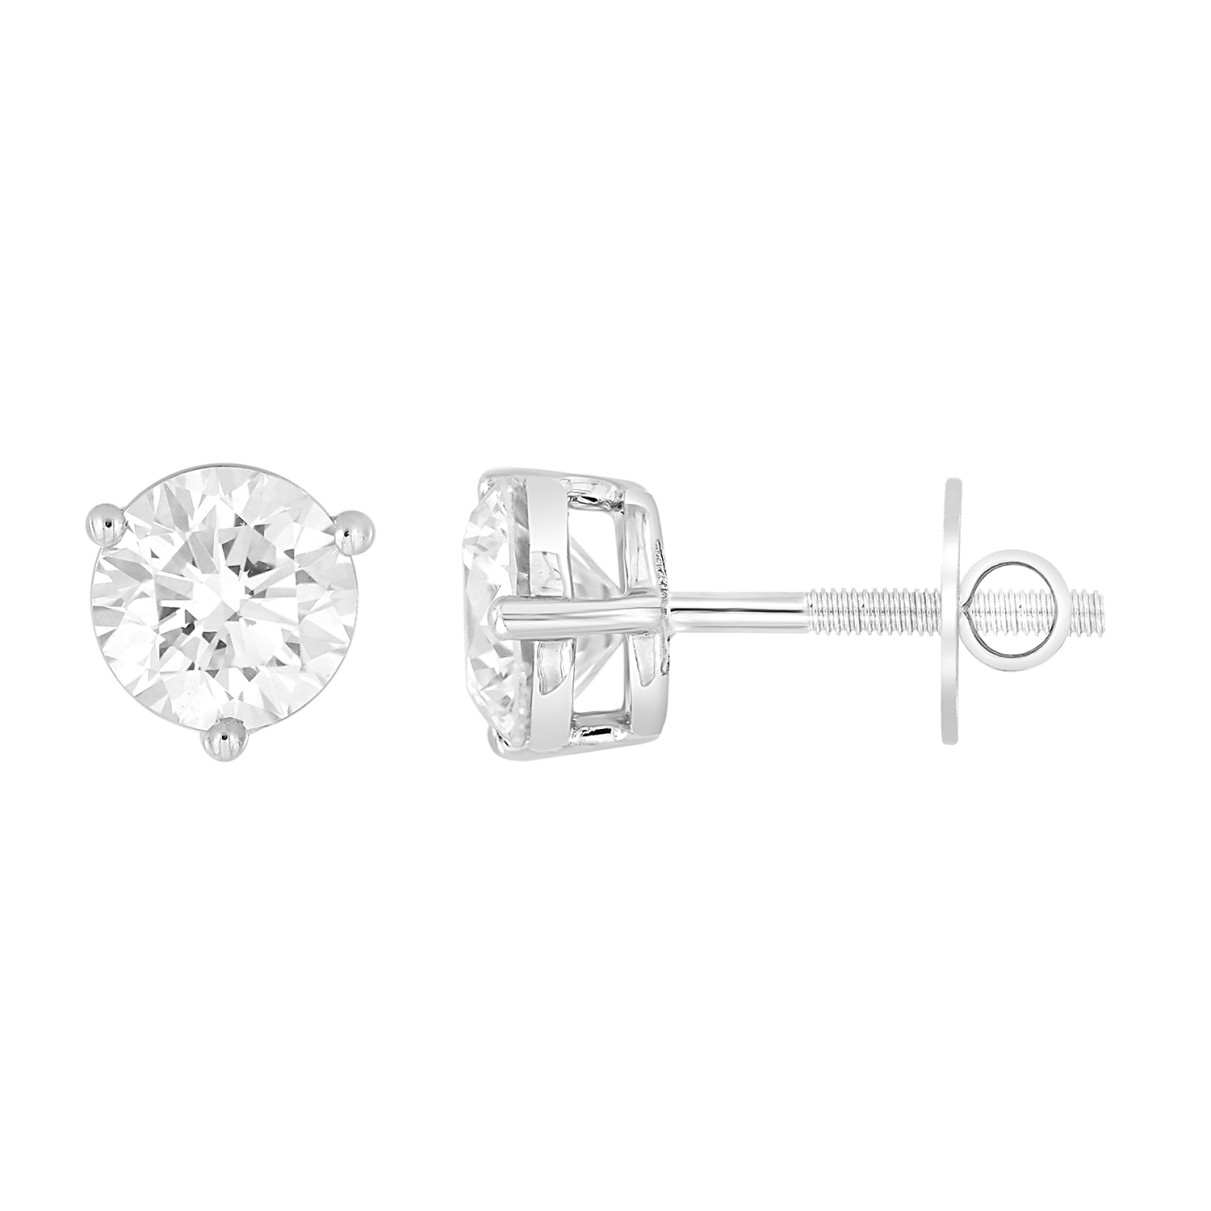 LADIES SOLITAIRE EARRINGS 1 1/2CT ROUND DIAMOND 14K WHITE GOLD 